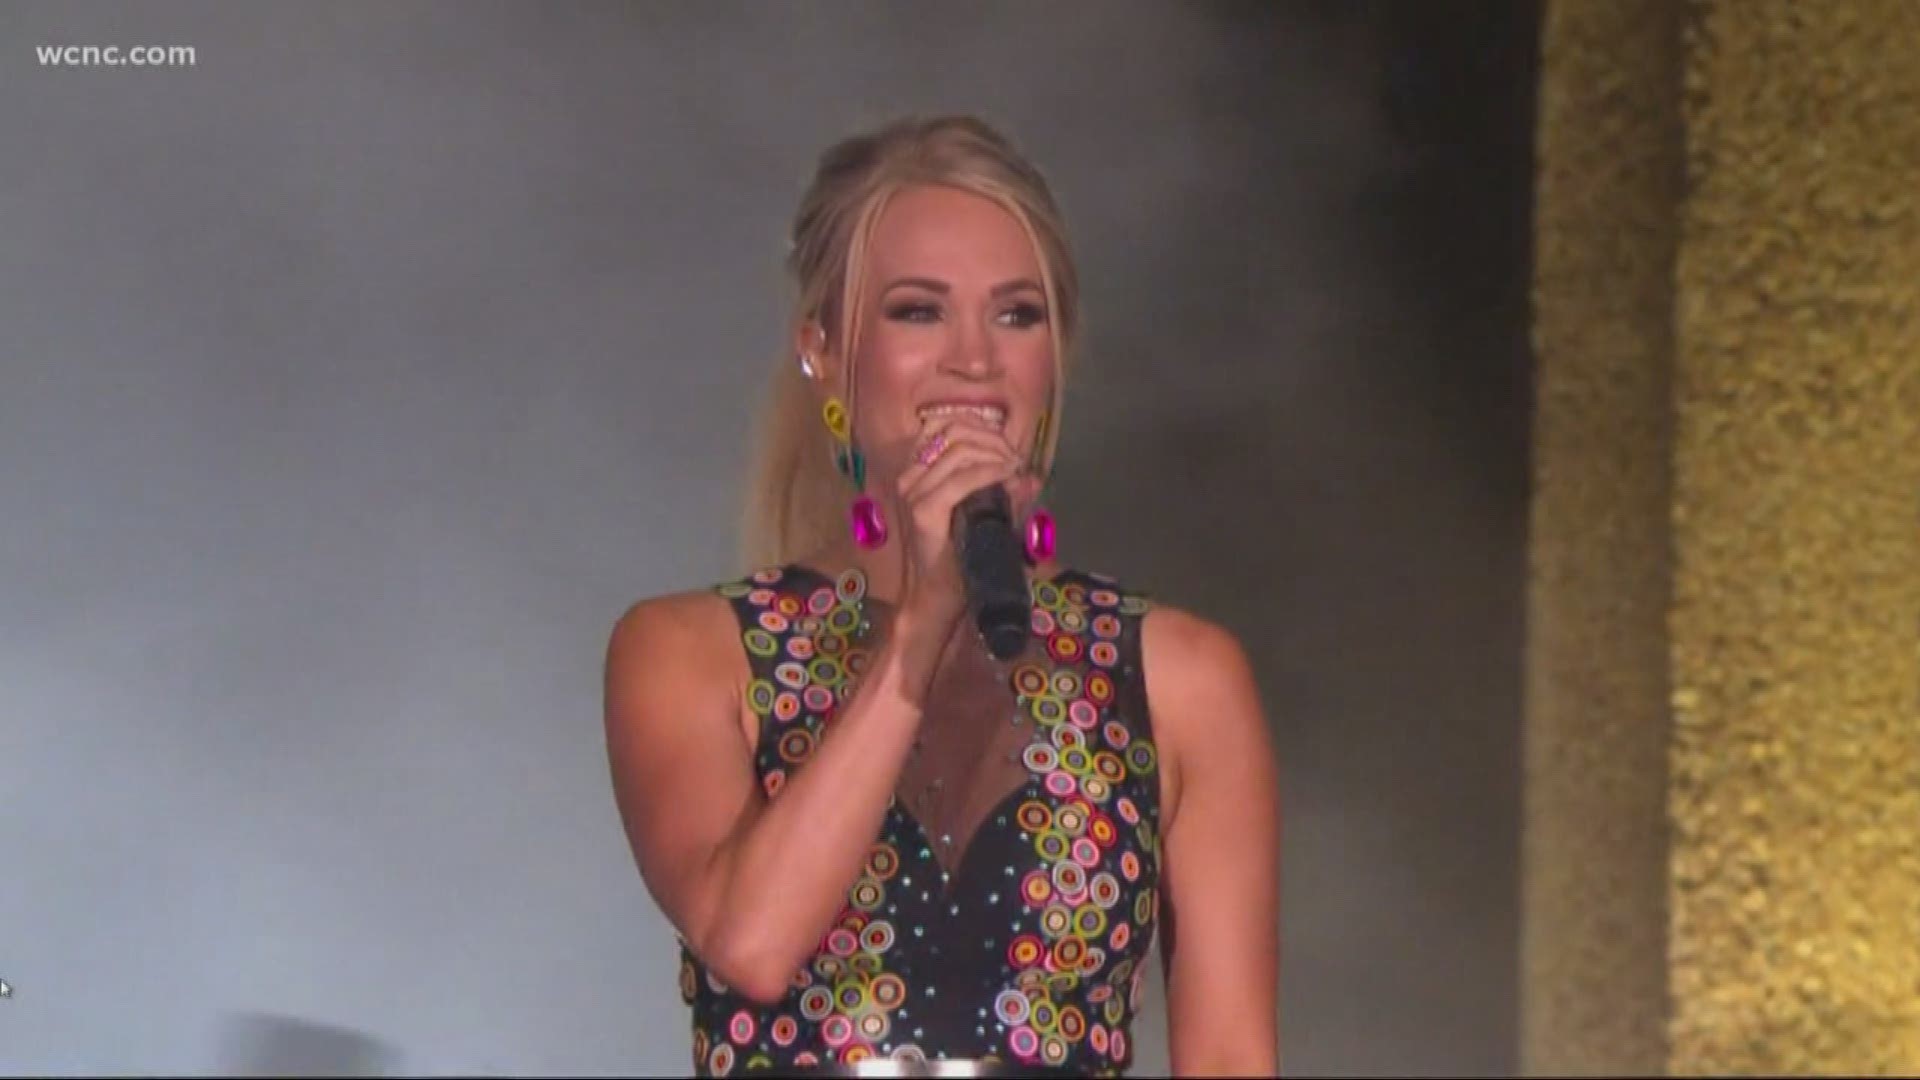 Carrie Underwood is now the most-awarded singer in country music history with her 19th and 20th career wins at the 2019 CMT Awards Wednesday.